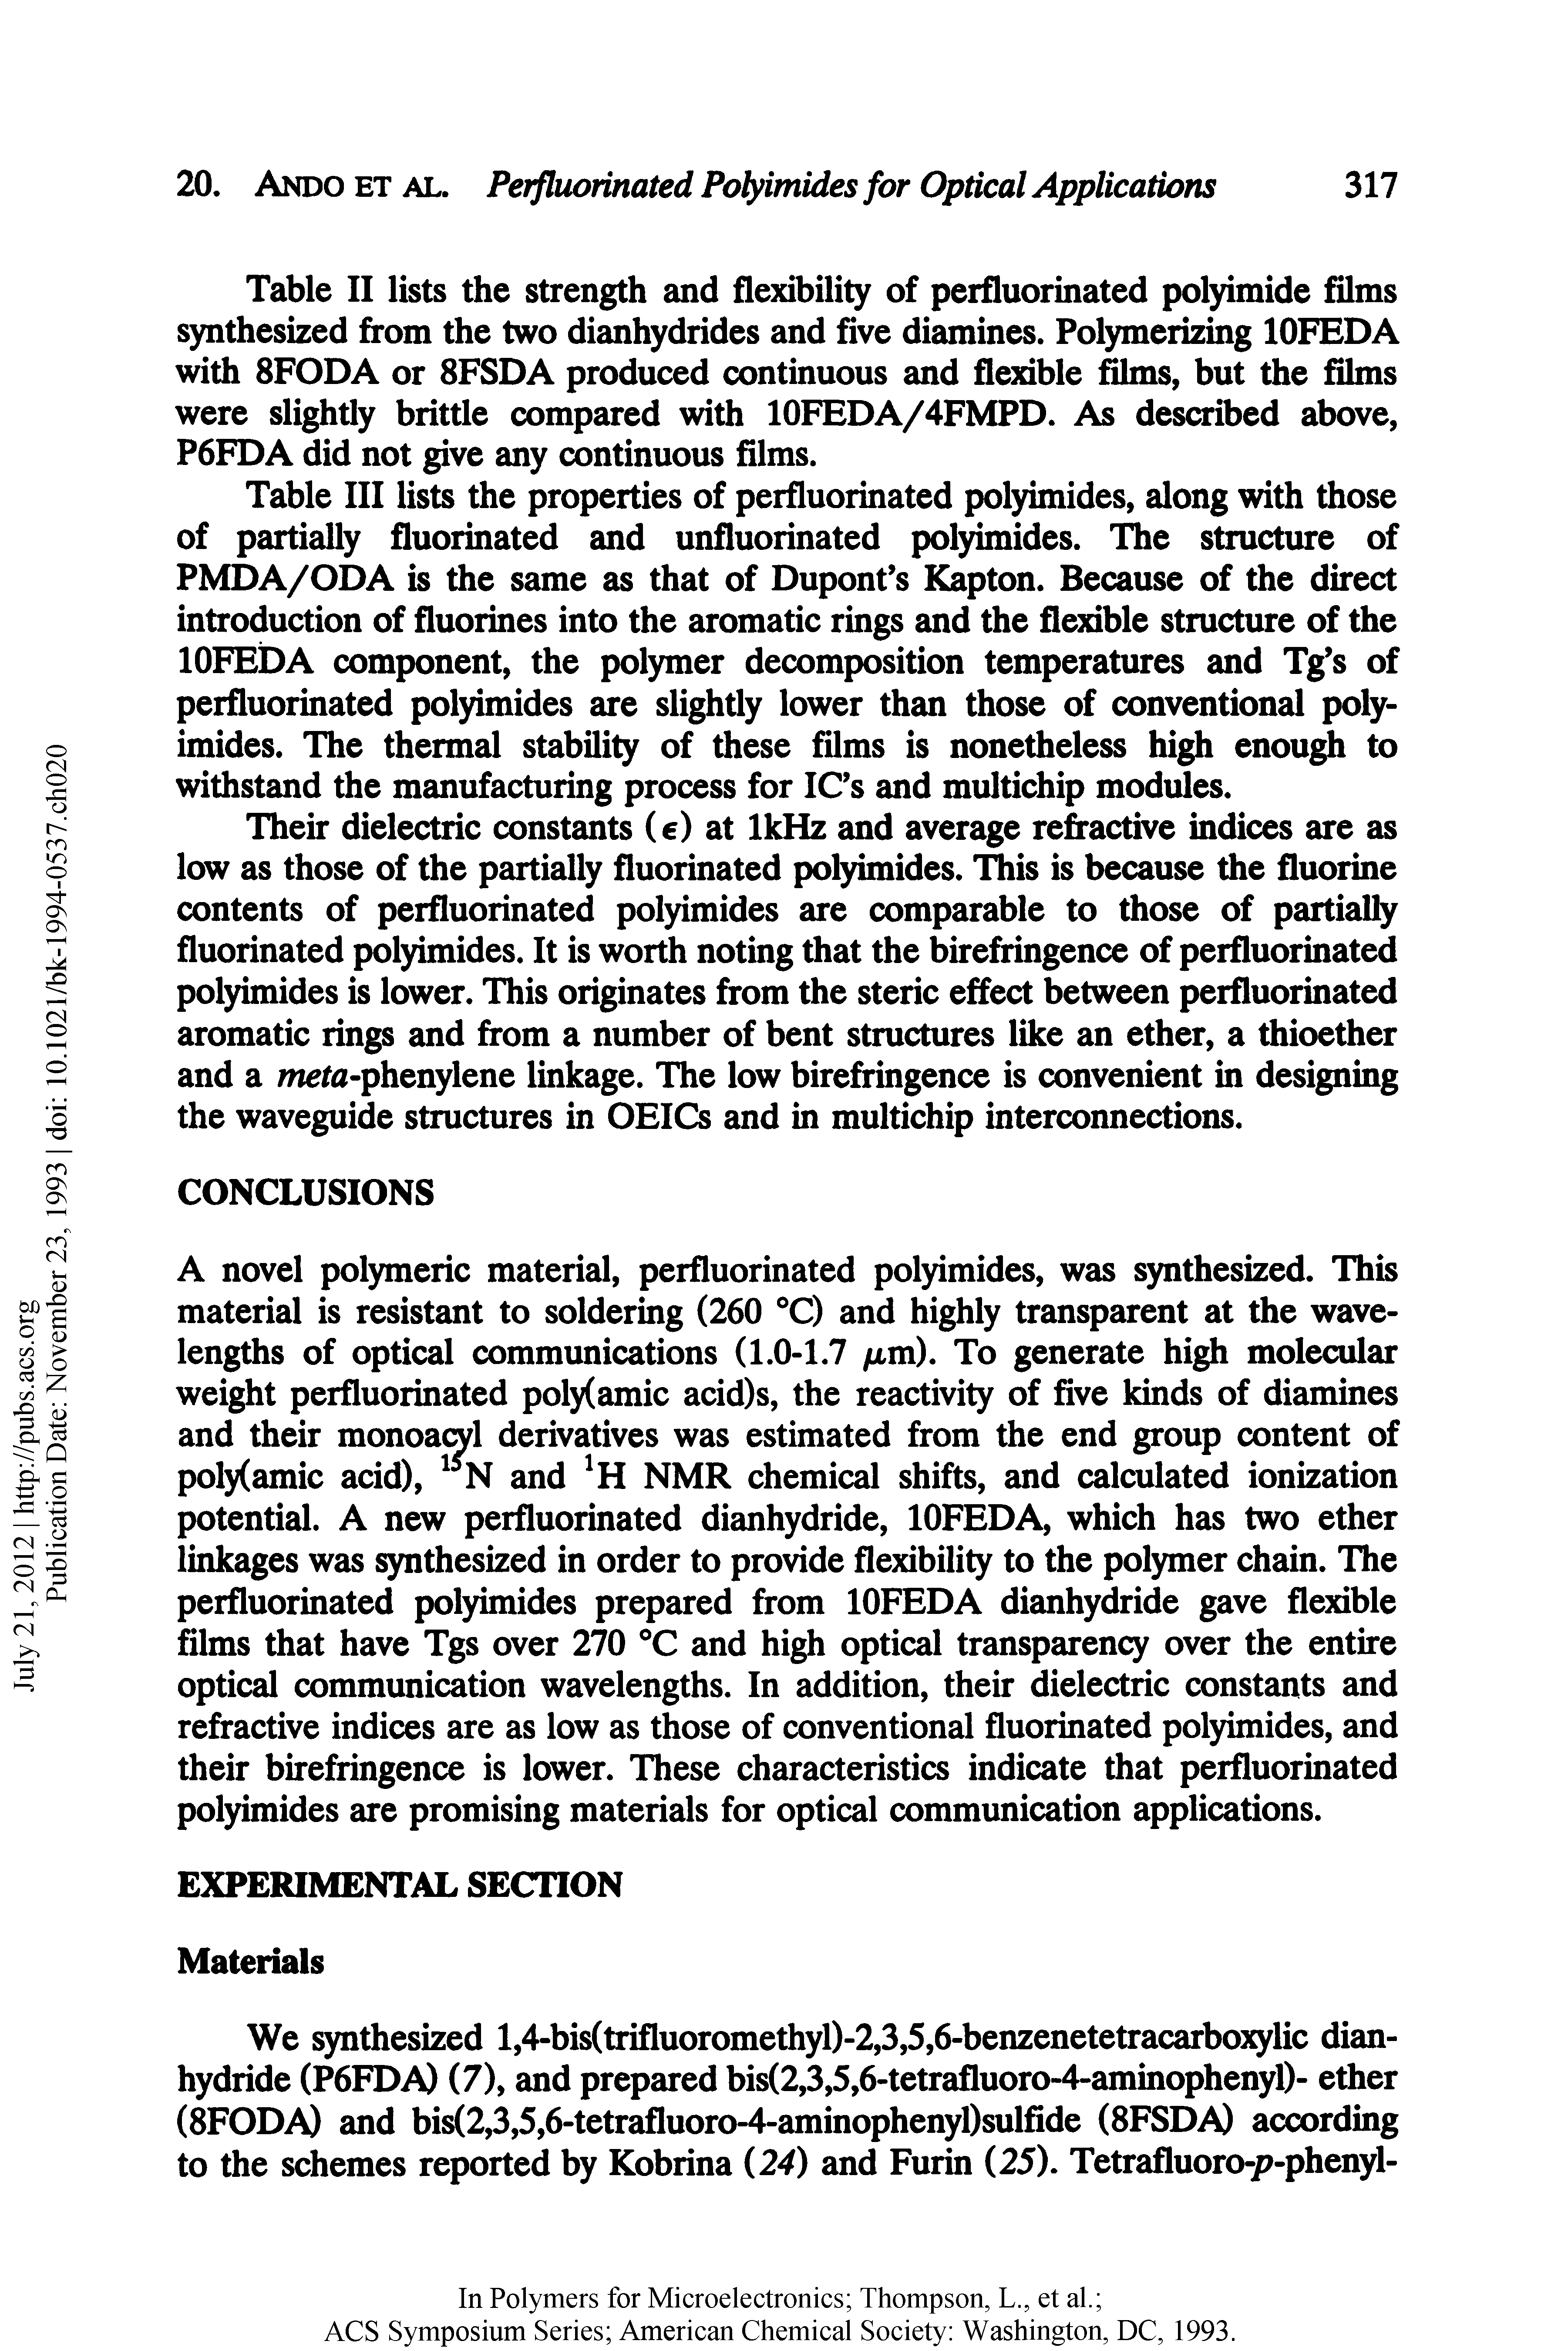 Table III lists the properties of perfluorinated polyimides, along with those of partially fluorinated and unfluorinated polyimides. The structure of PMDA/ODA is the same as that of Dupont s Kapton. Because of the direct introduction of fluorines into the aromatic rings and the flexible structure of the lOFEDA component, the polymer decomposition temperatures and Tg s of perfluorinated polyimides are slightly lower than those of conventional poly imides. The thermal stability of these films is nonetheless high enough to withstand the manufacturing process for IC s and muitichip modules.